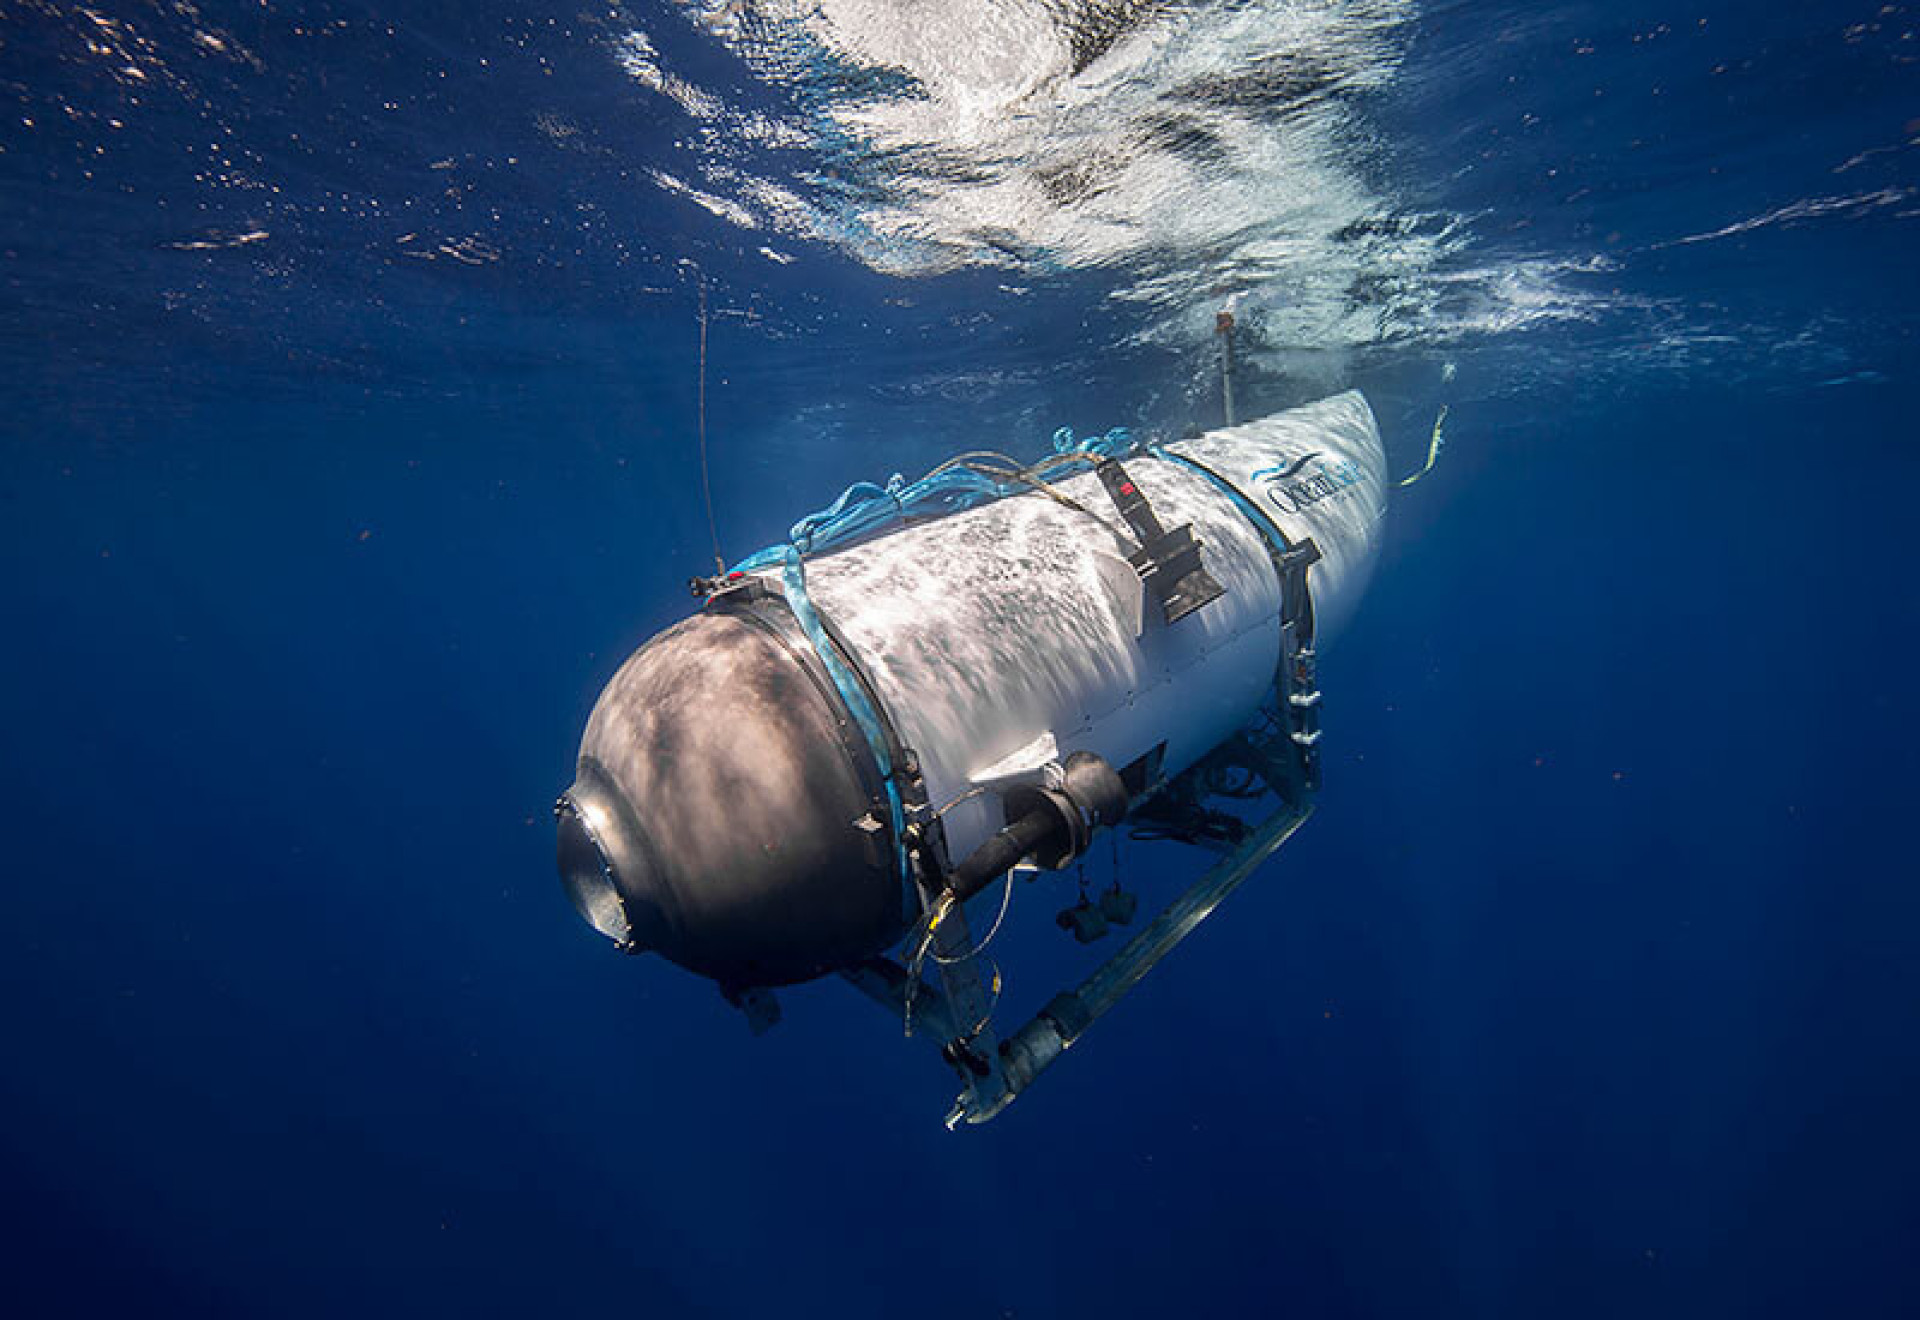 <p>The pictured sub belonged to OceanGate Expeditions, a private company that provides crewed submersible services for exploration, industry, and research purposes. But on June 18, 2023, one of their <span><span>submersibles went missing after two hours of getting into the North Atlantic to explore the Titanic wreck—a trip that cost US$250,000 a head. Tragically, the five individuals aboard were all declared dead on</span></span><span><span> June 22.</span></span></p><p><a href="https://www.msn.com/en-us/community/channel/vid-7xx8mnucu55yw63we9va2gwr7uihbxwc68fxqp25x6tg4ftibpra?cvid=94631541bc0f4f89bfd59158d696ad7e">Follow us and access great exclusive content every day</a></p>